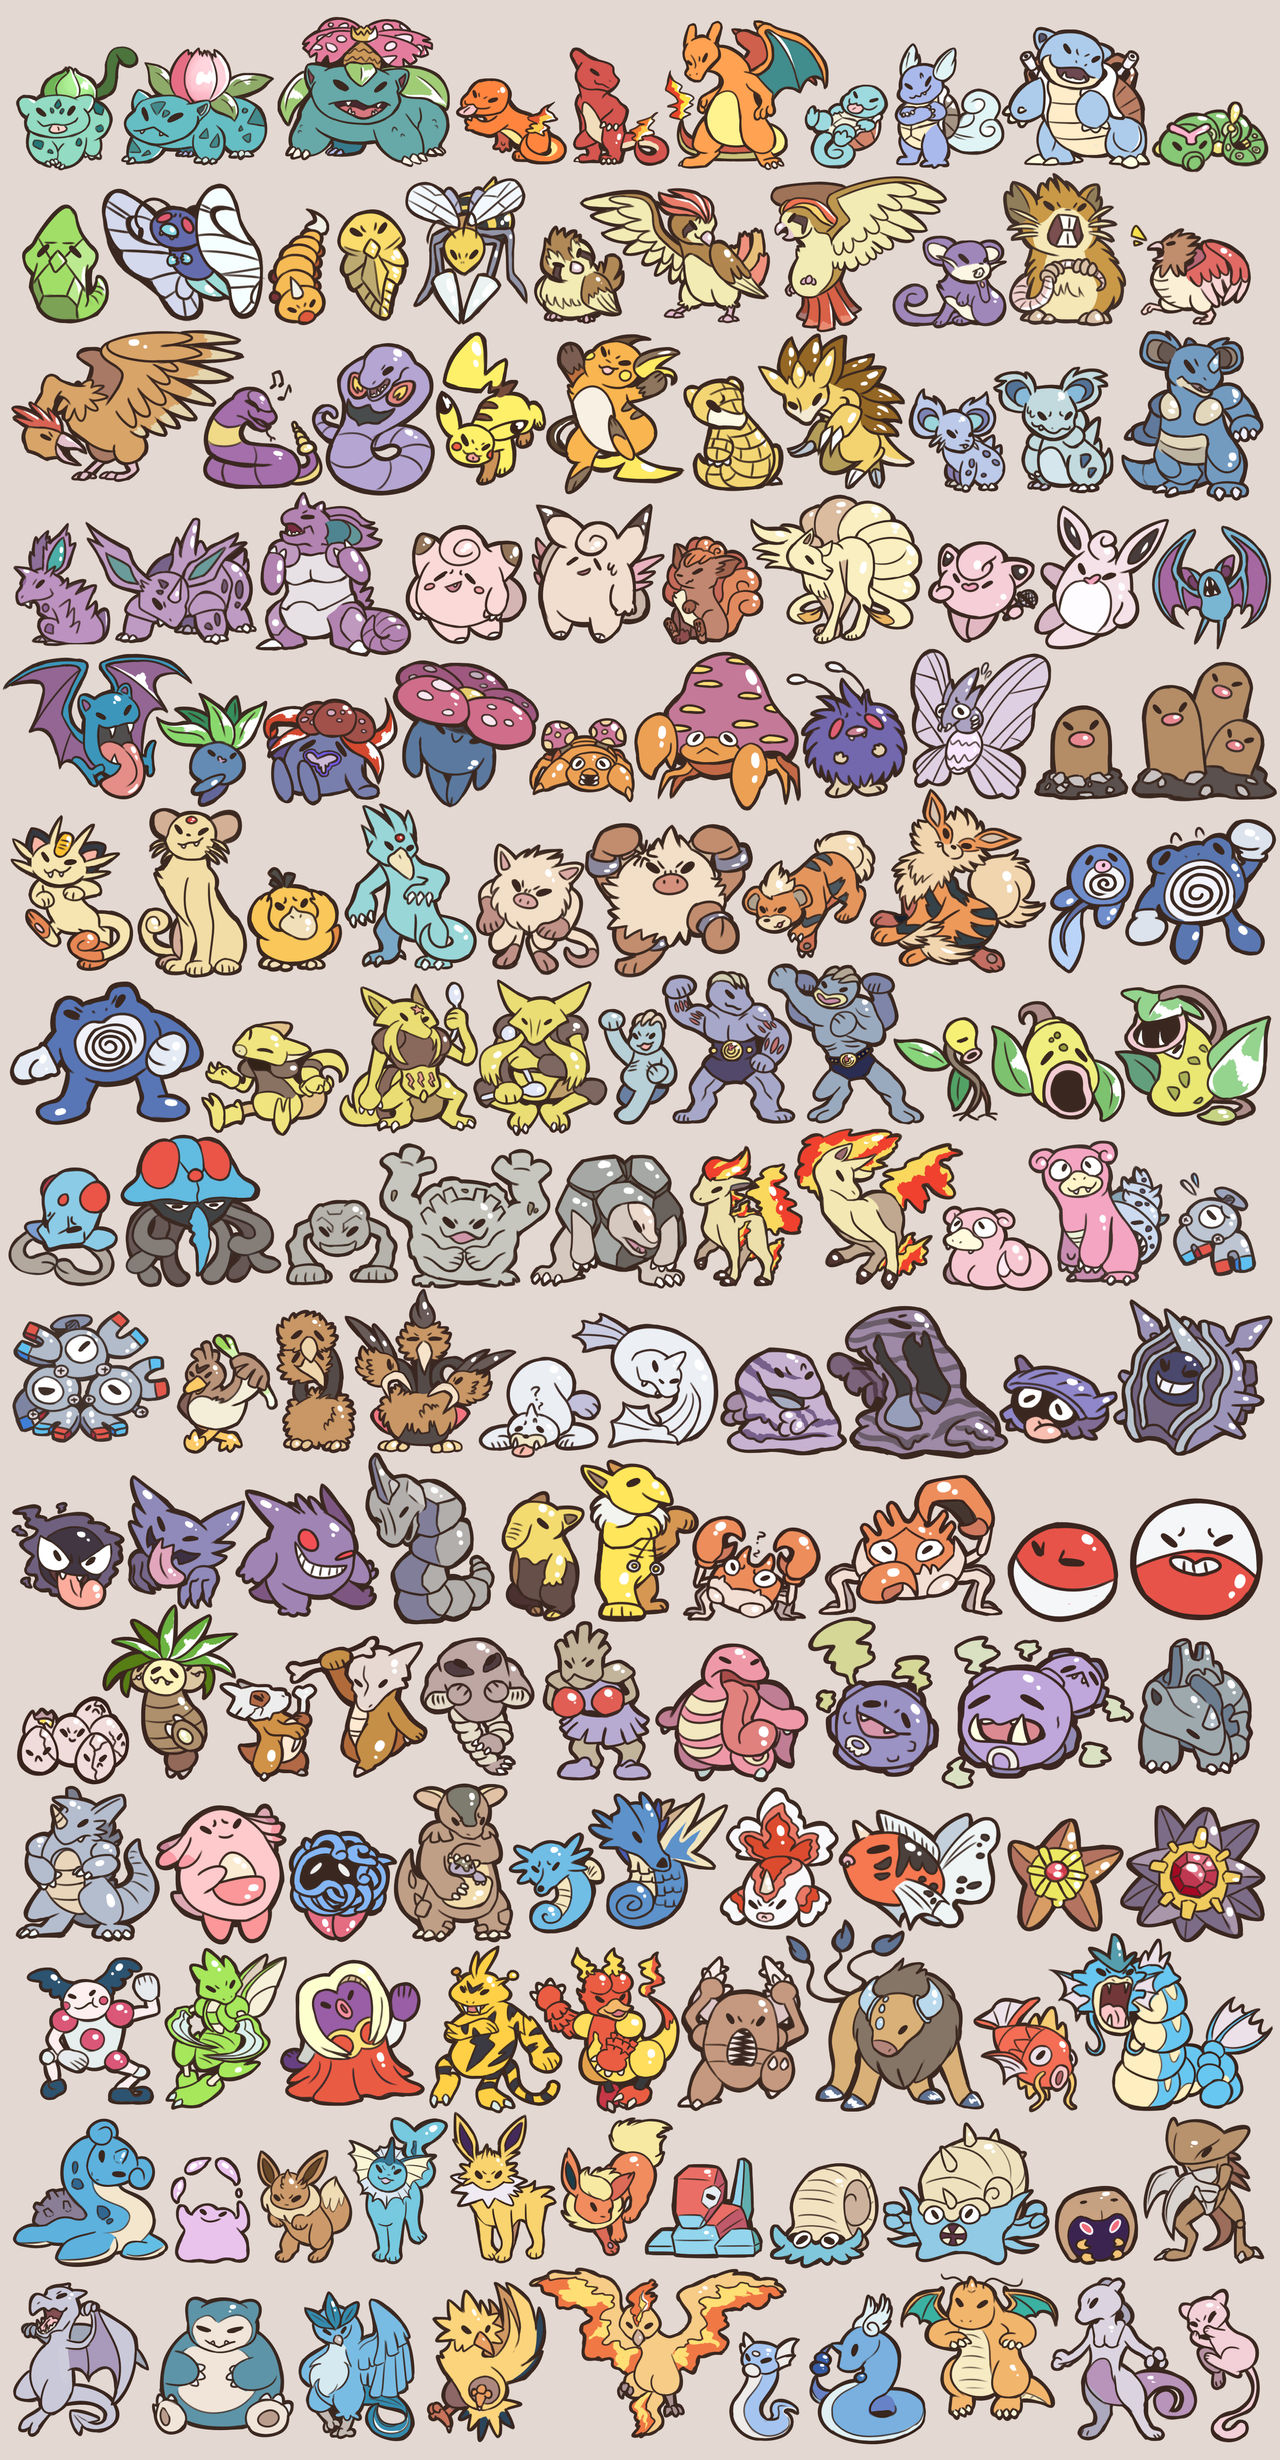 All 151 Pokemon Help by FrostedFires on DeviantArt